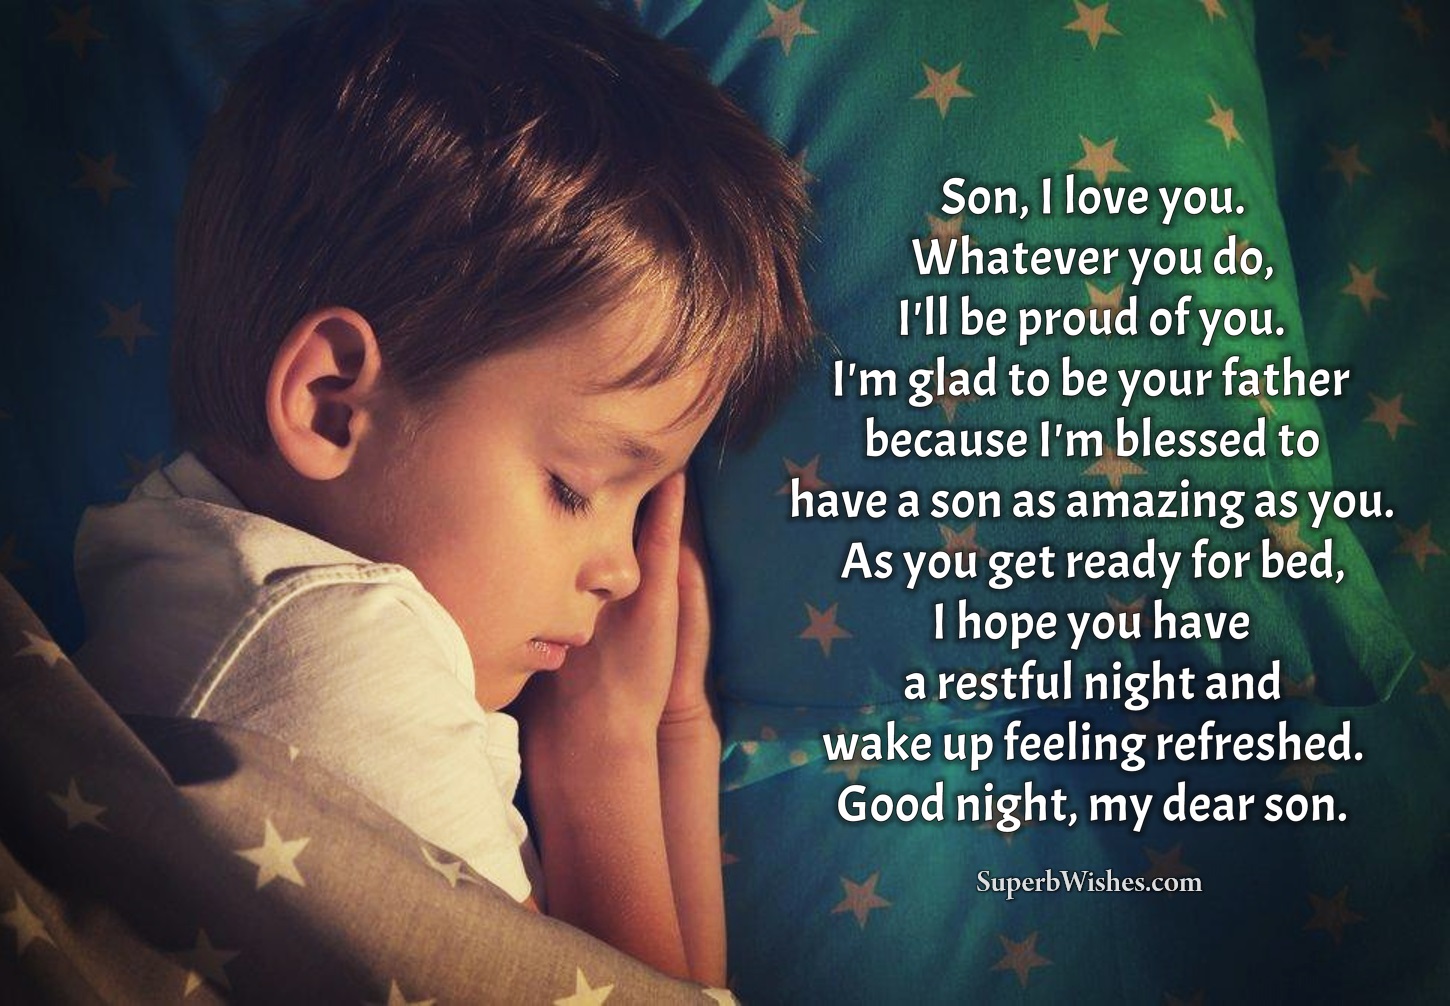 Good night wishes for son